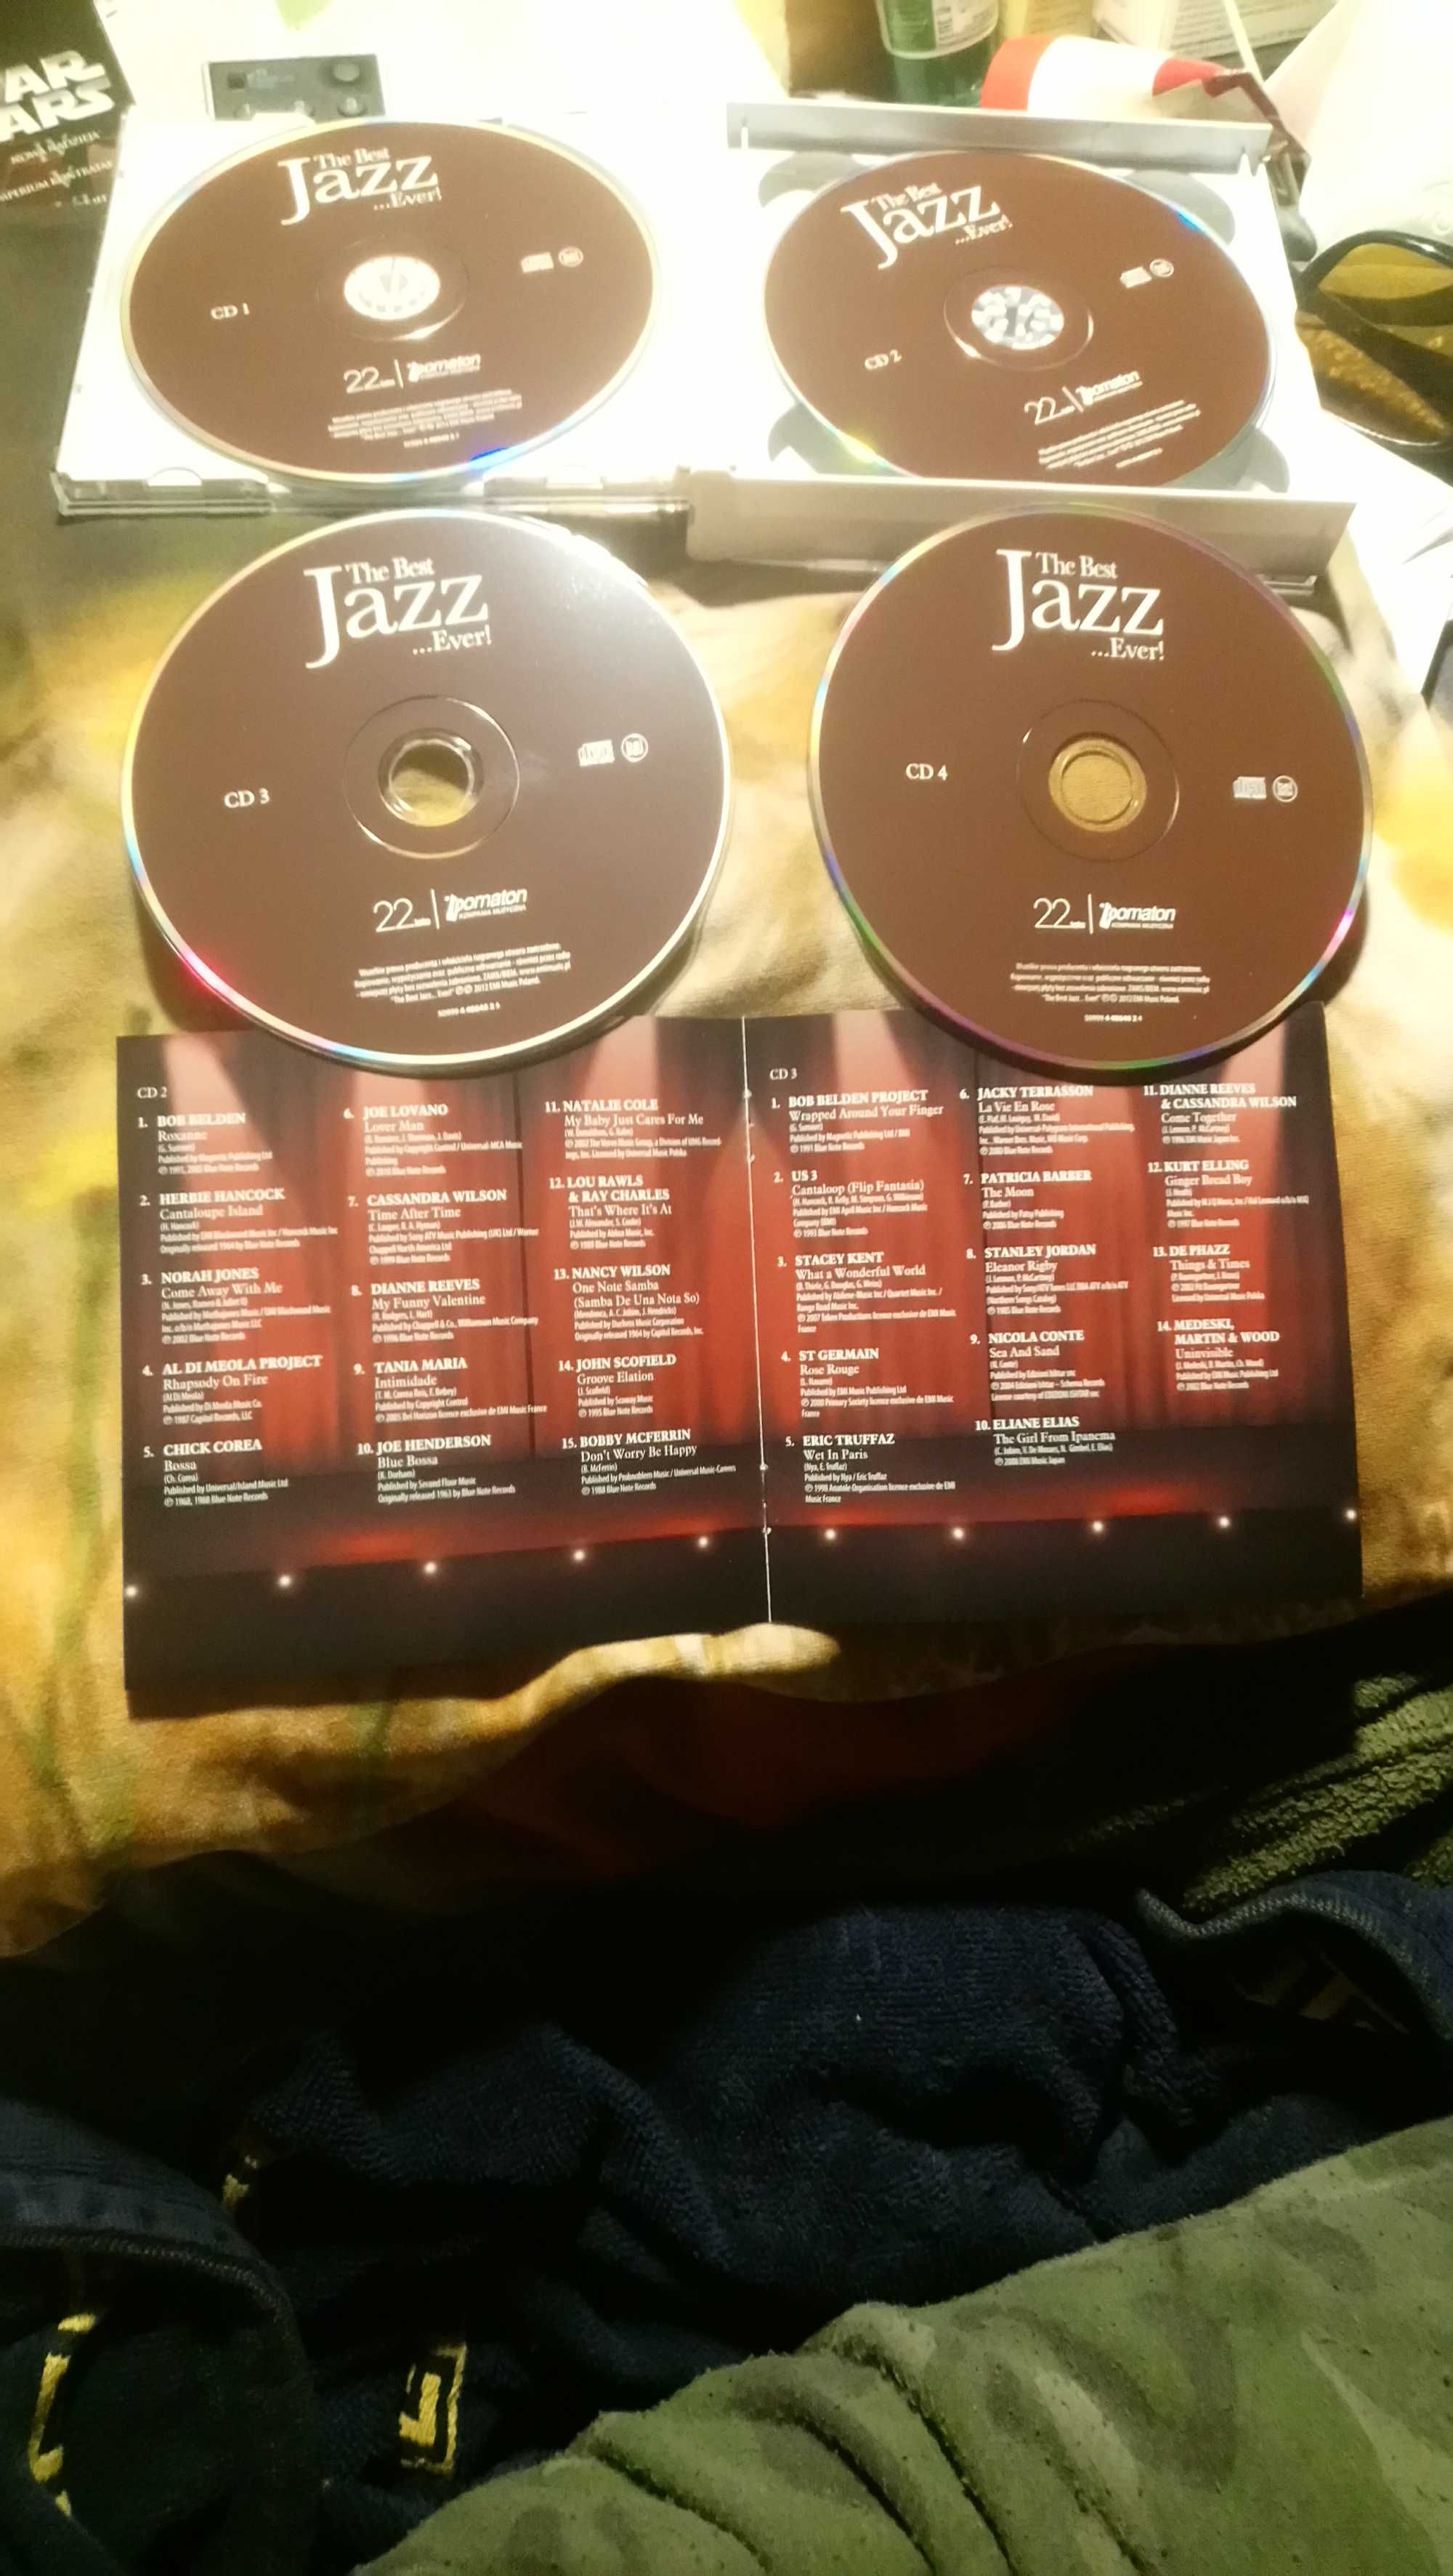 The jazz best ...ever! 4cd